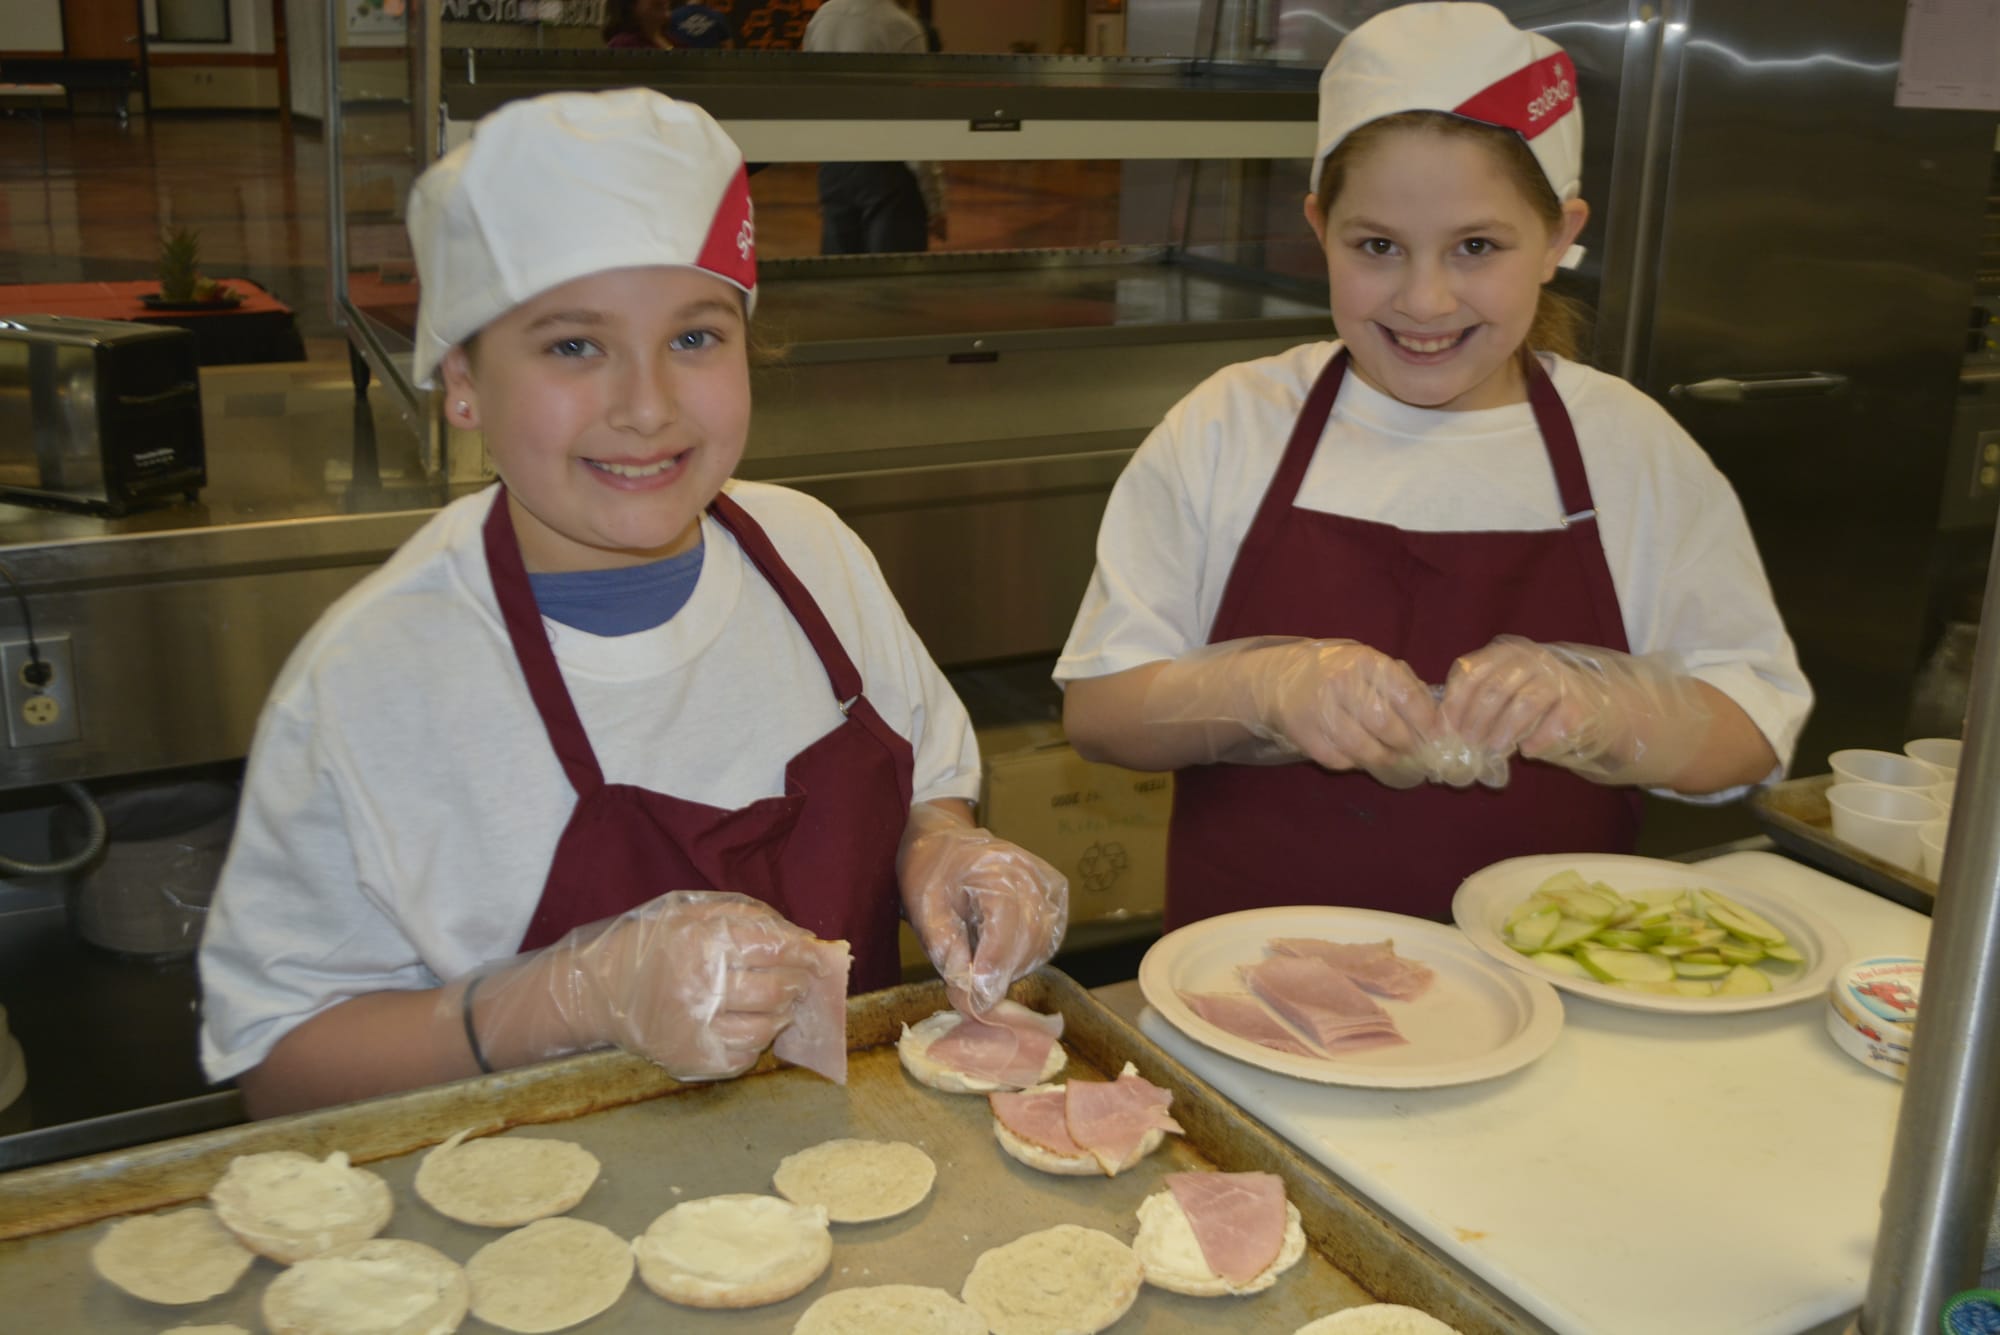 Washougal: Hathaway Elementary School student Danielle Melton, left, and Gause Elementary School student Mackenzie Mills take part in a live cooking competition March 13, 2014, at Washougal High School.